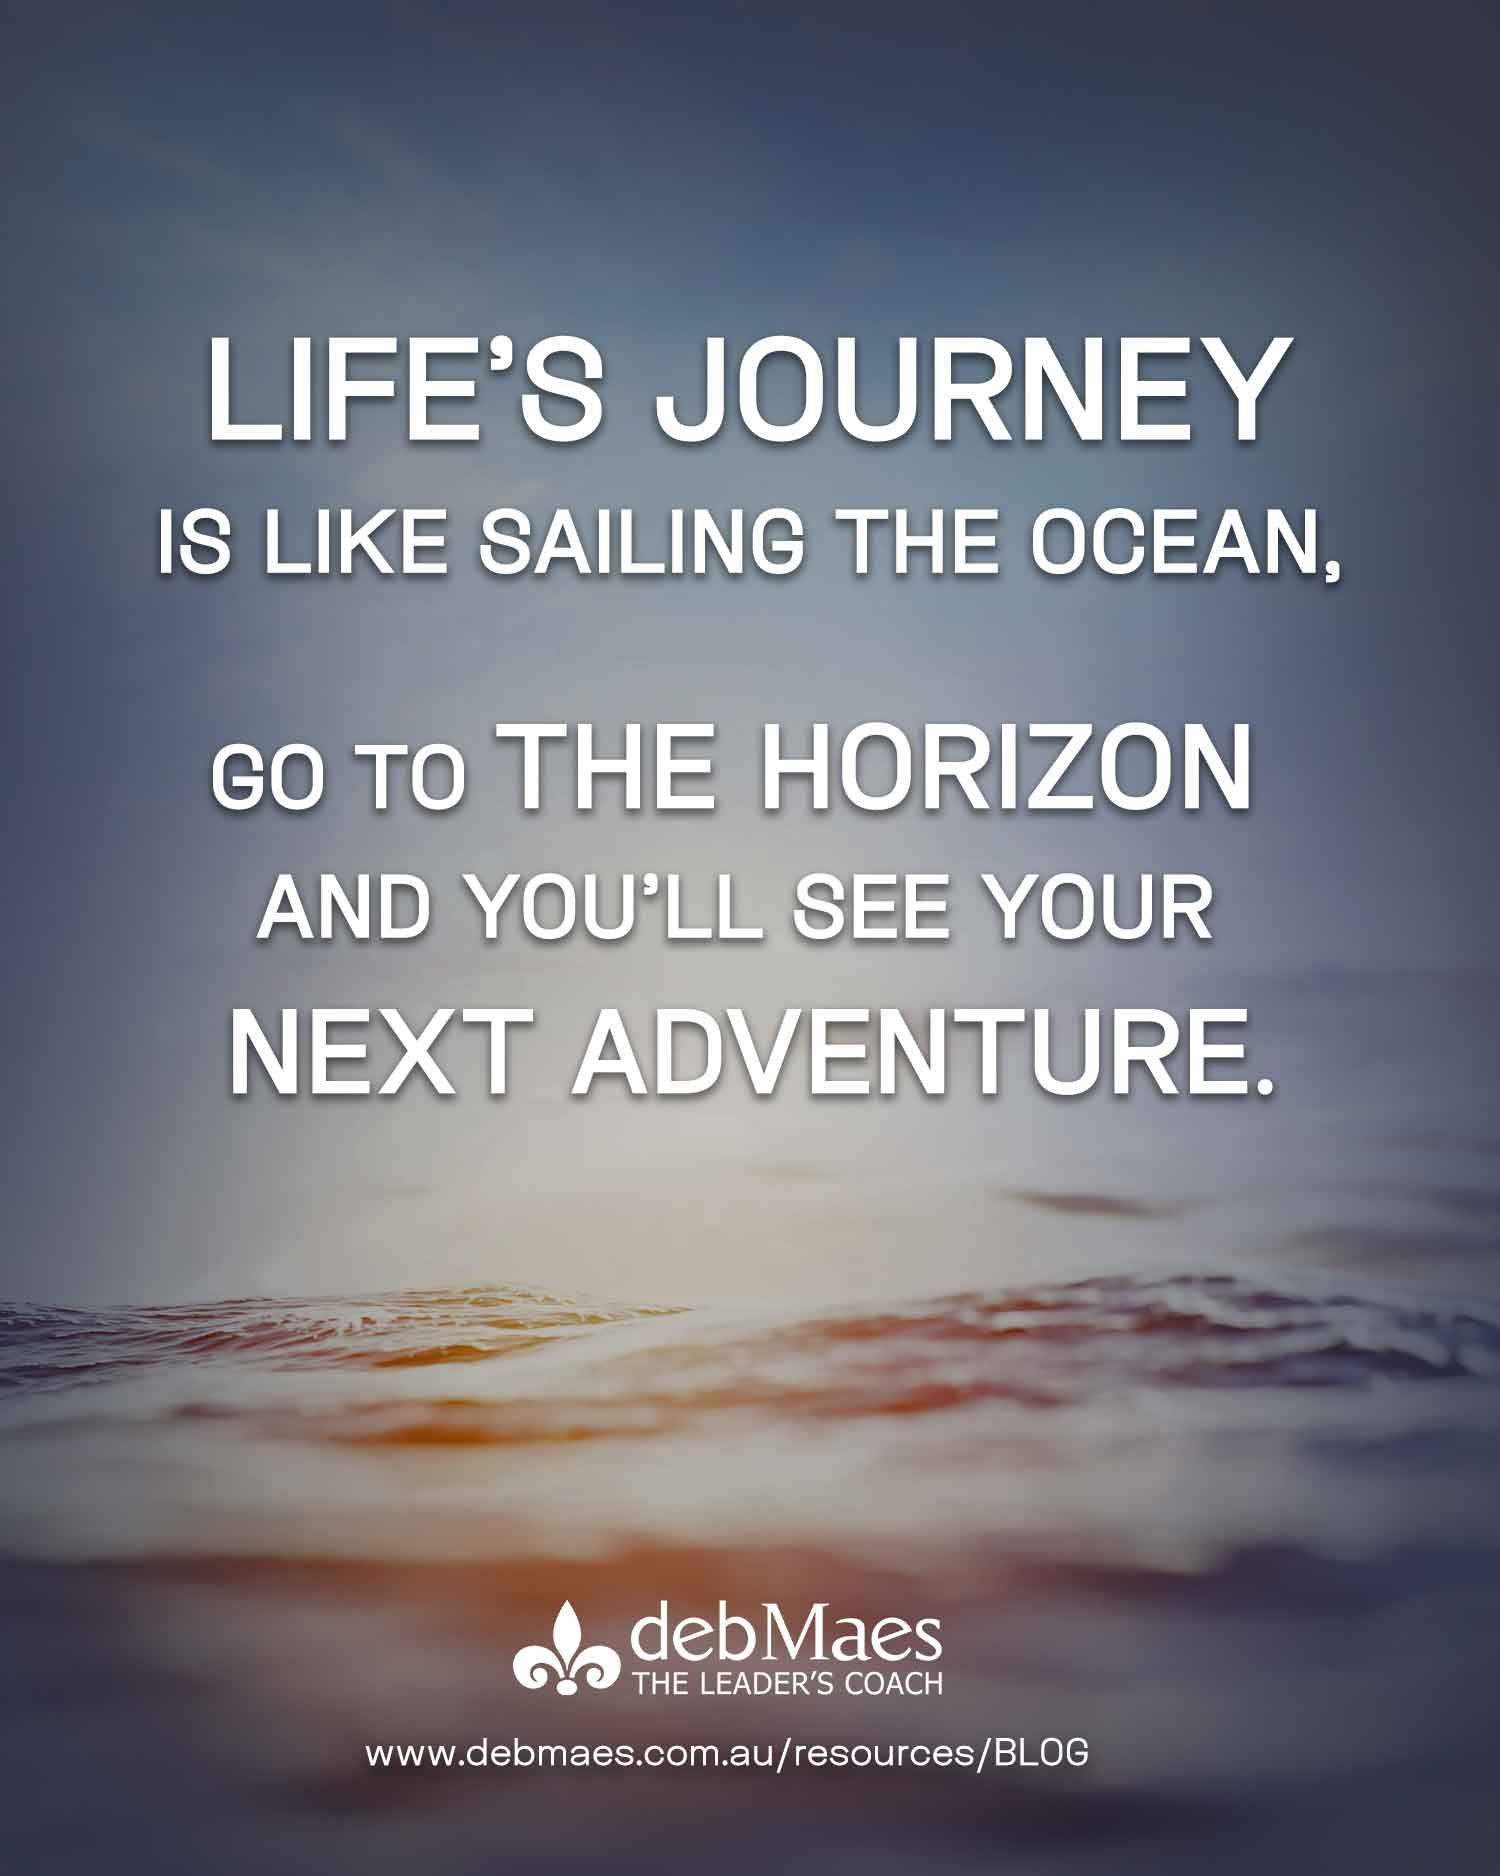 life's journey is like sailing the ocean, go to the horizon and you'll see your next adventure